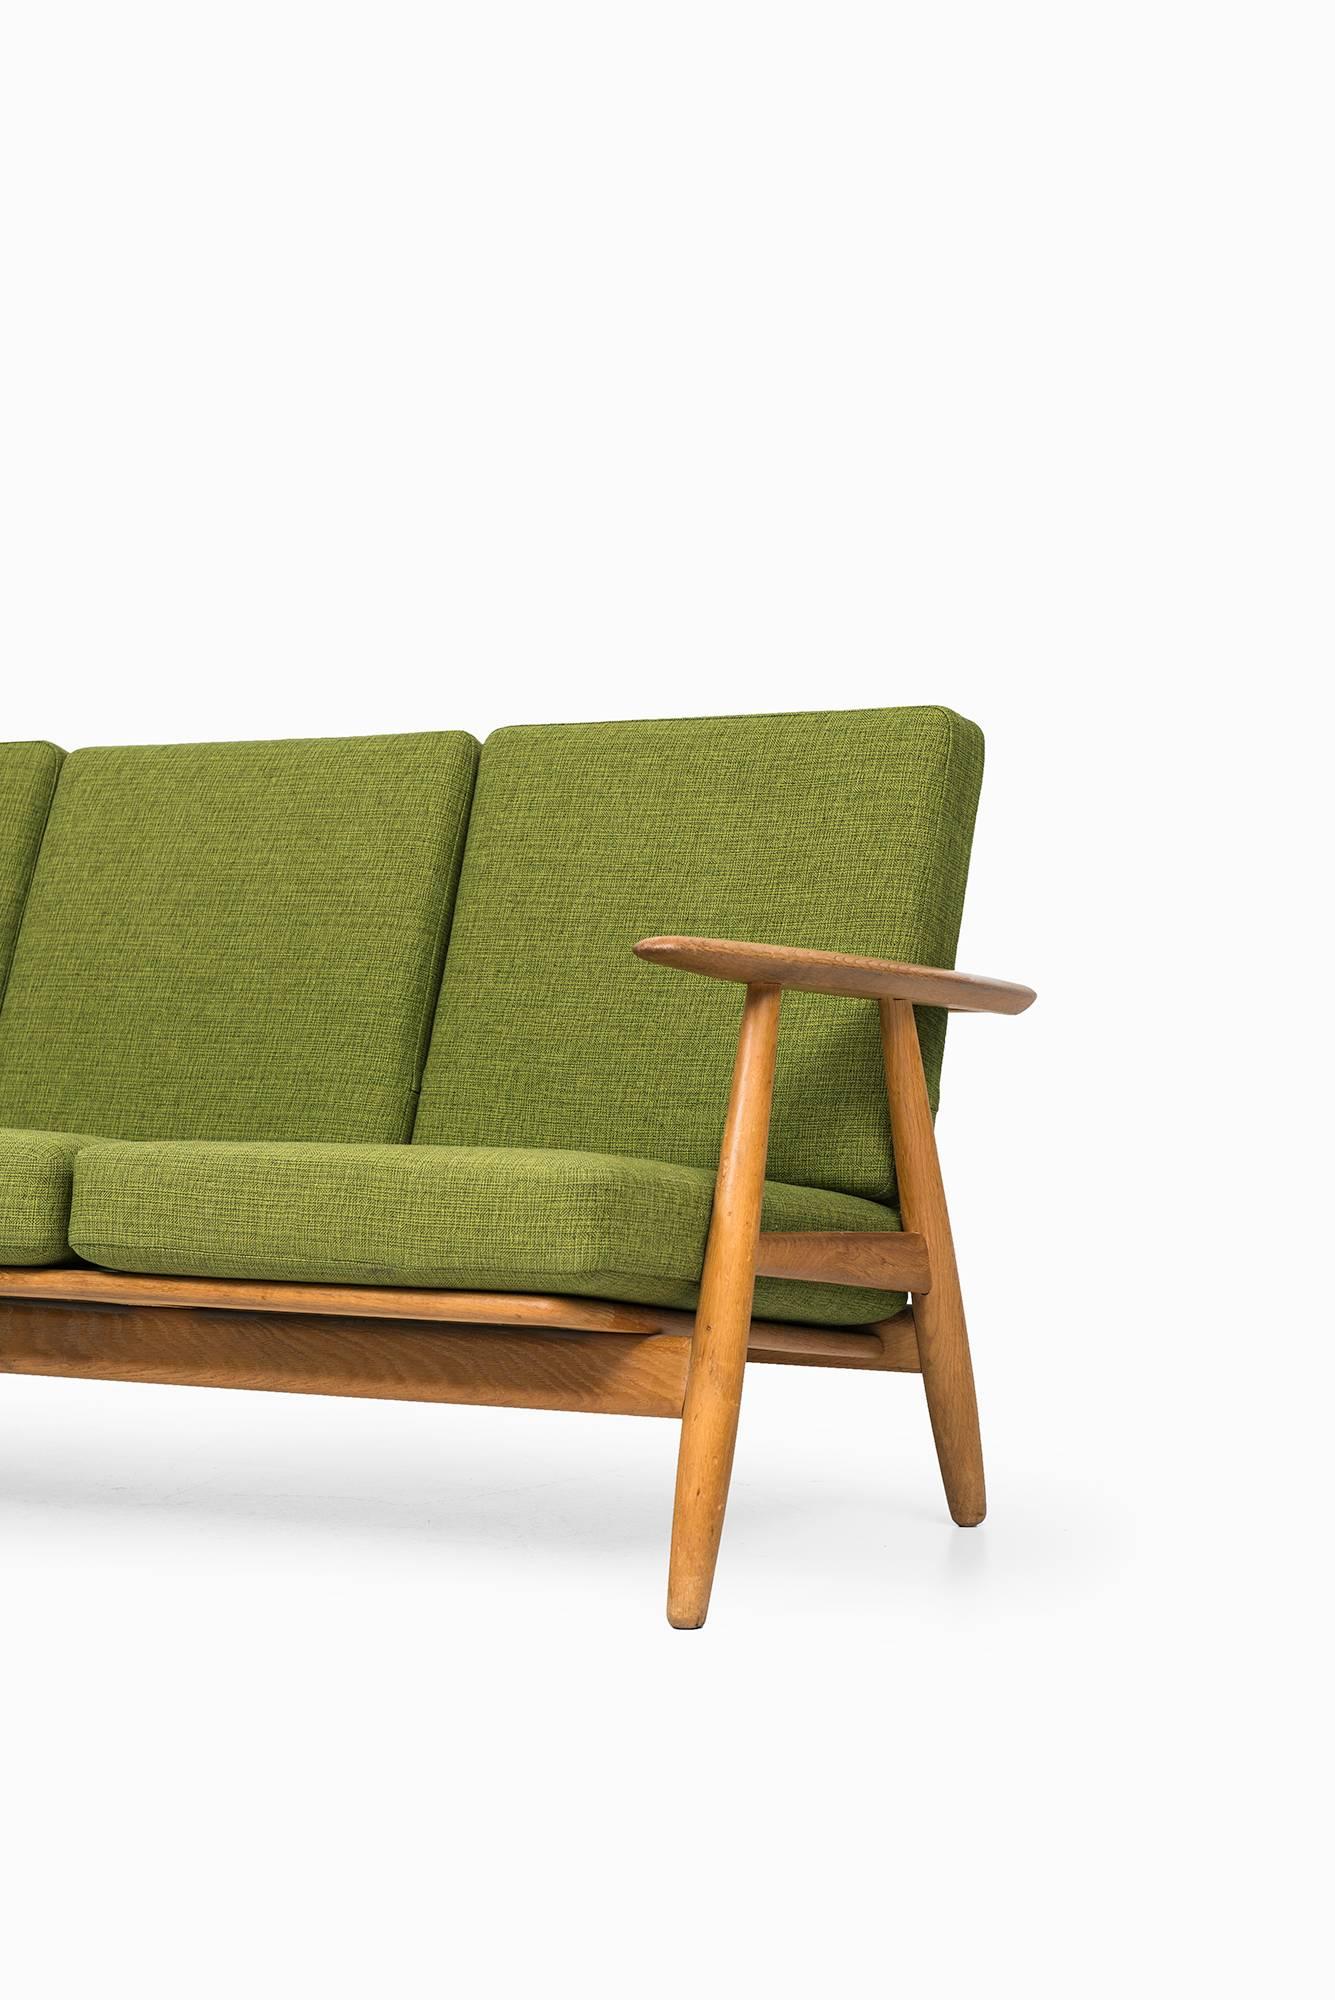 Sofa model GE-240 / Cigar designed by Hans Wegner. Produced by GETAMA in Denmark. Oak and newly reupholstered fabric.